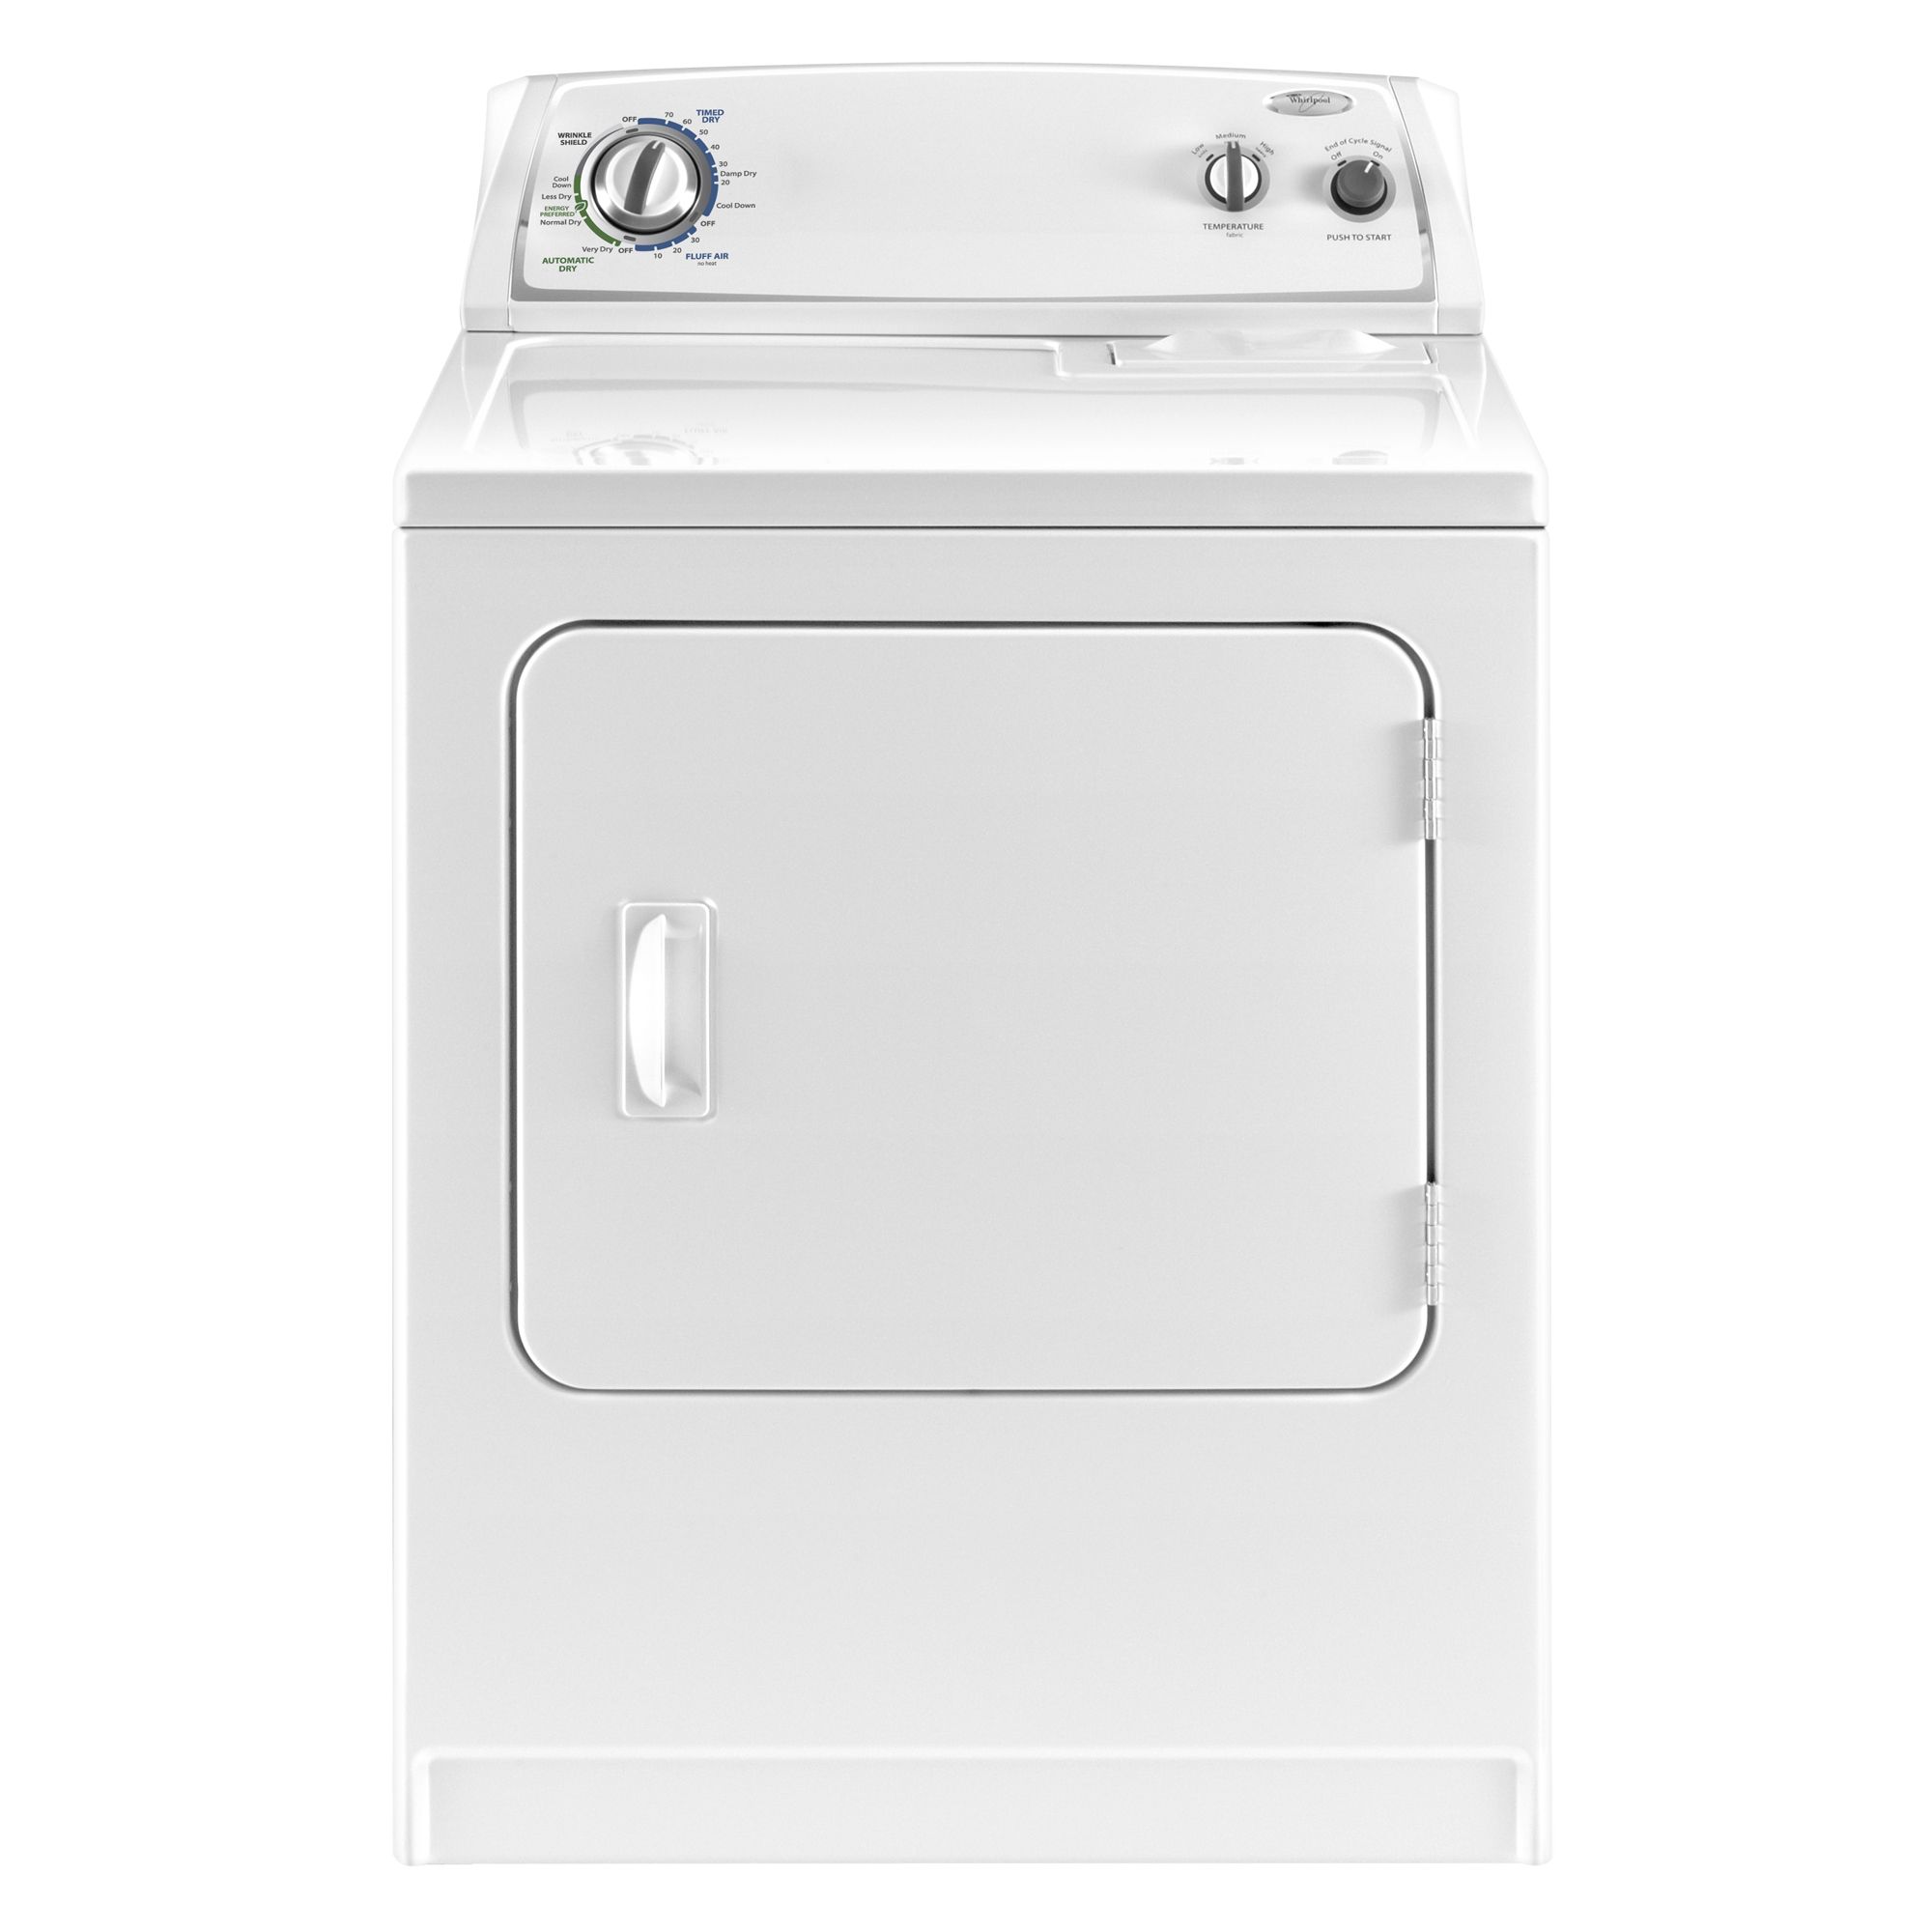 Whirlpool WED4800XQ 7.0 cu. ft. Electric Dryer